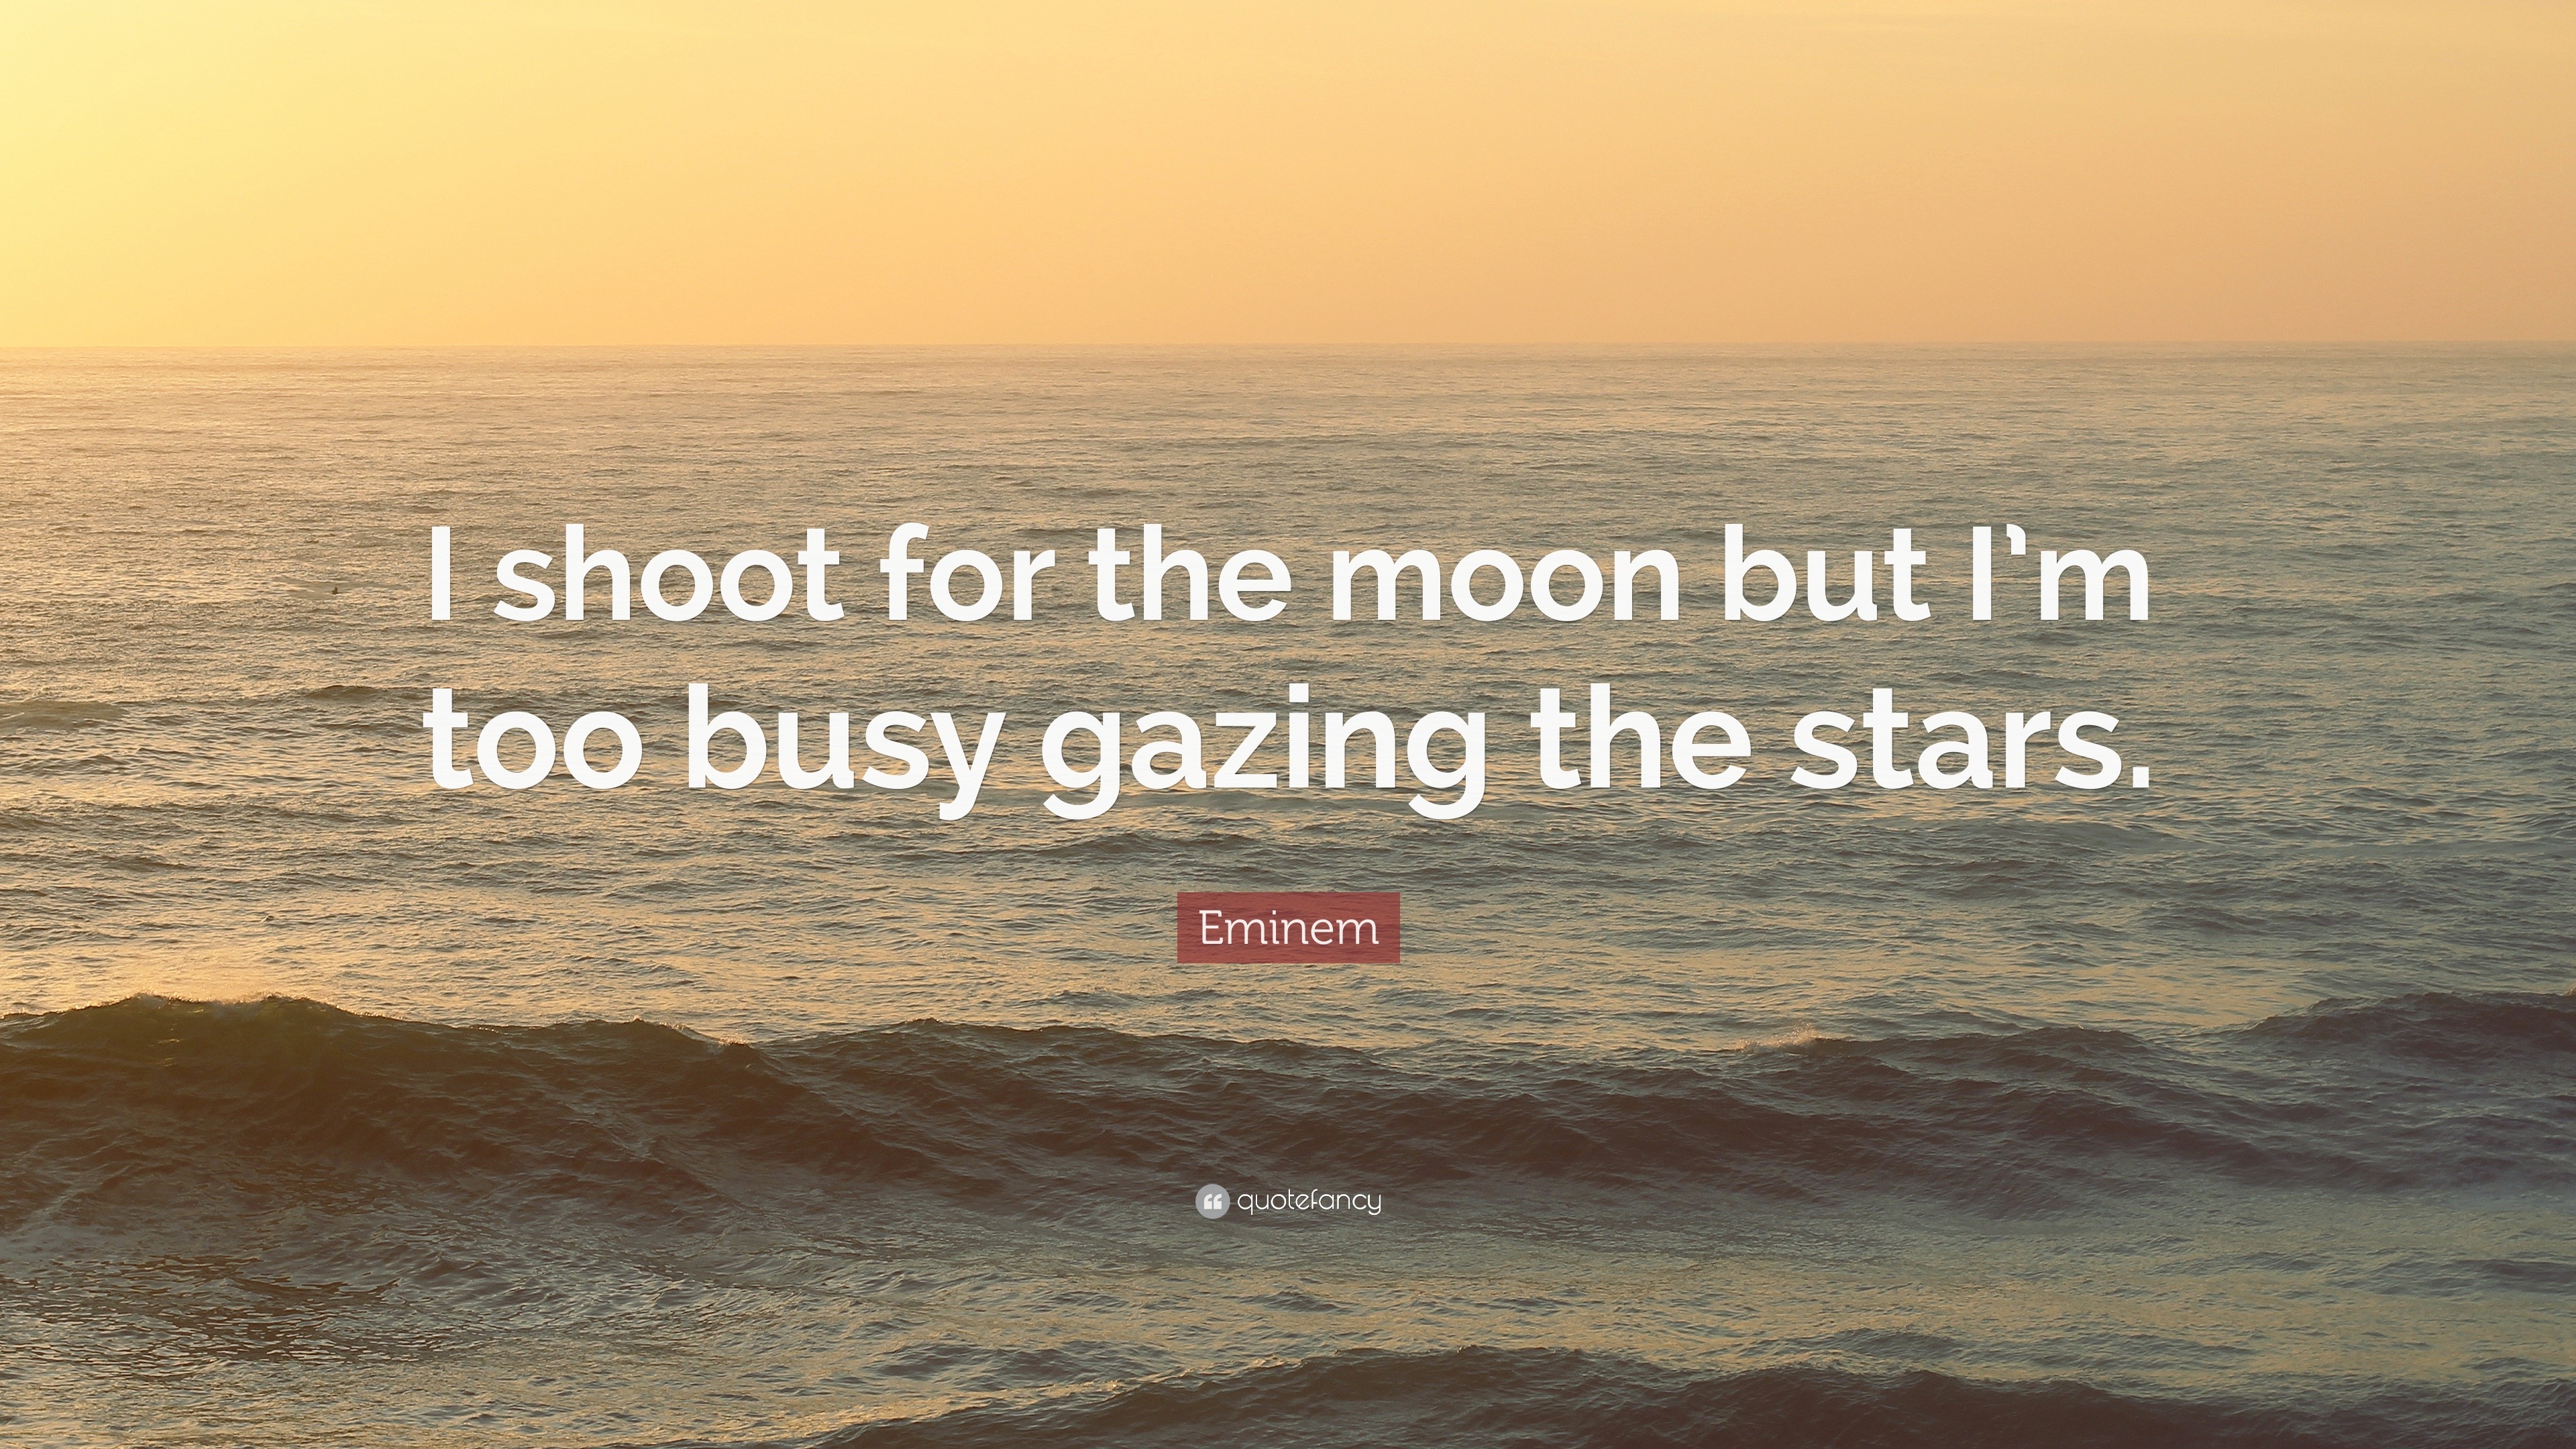 1720660 Eminem Quote I shoot for the moon but I m too busy gazing the